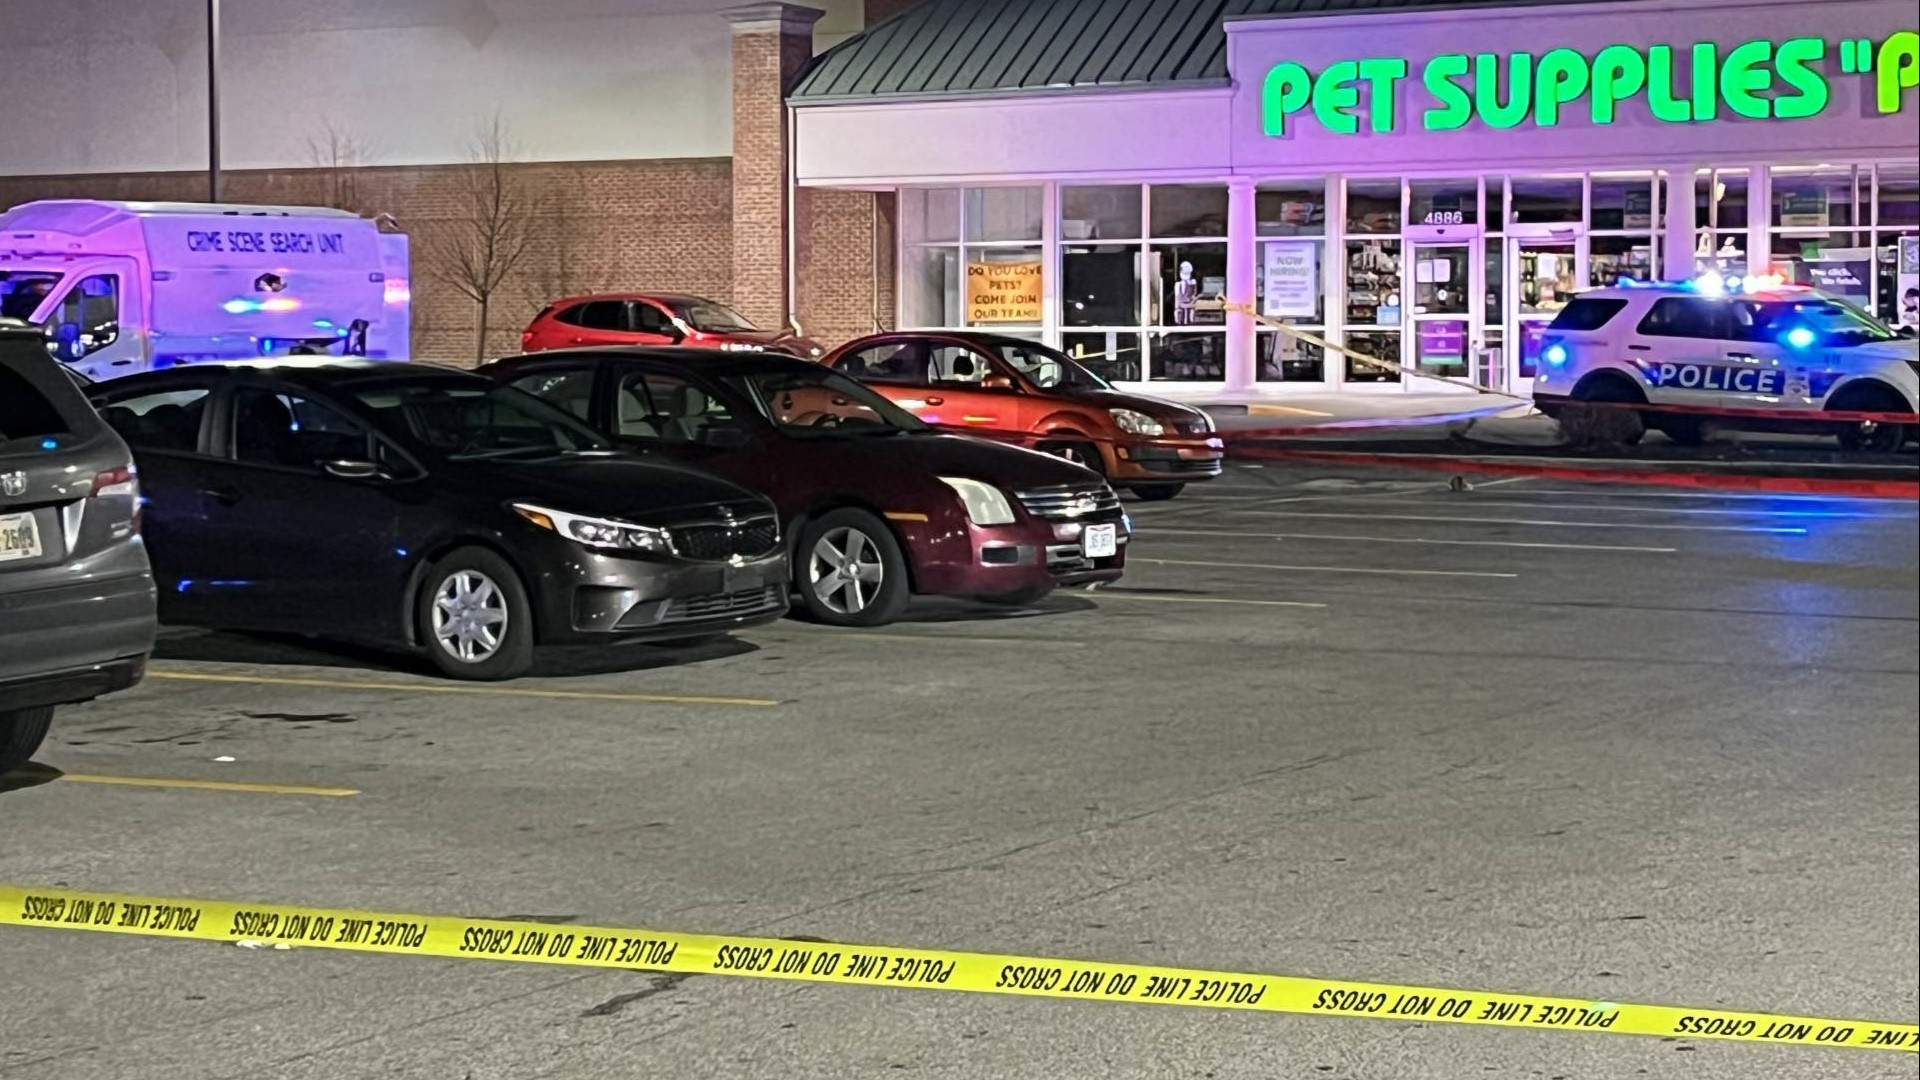 The Columbus Division of Police identified the 42-year-old woman who died after being shot at a shopping center on the city's northeast side on Sunday.